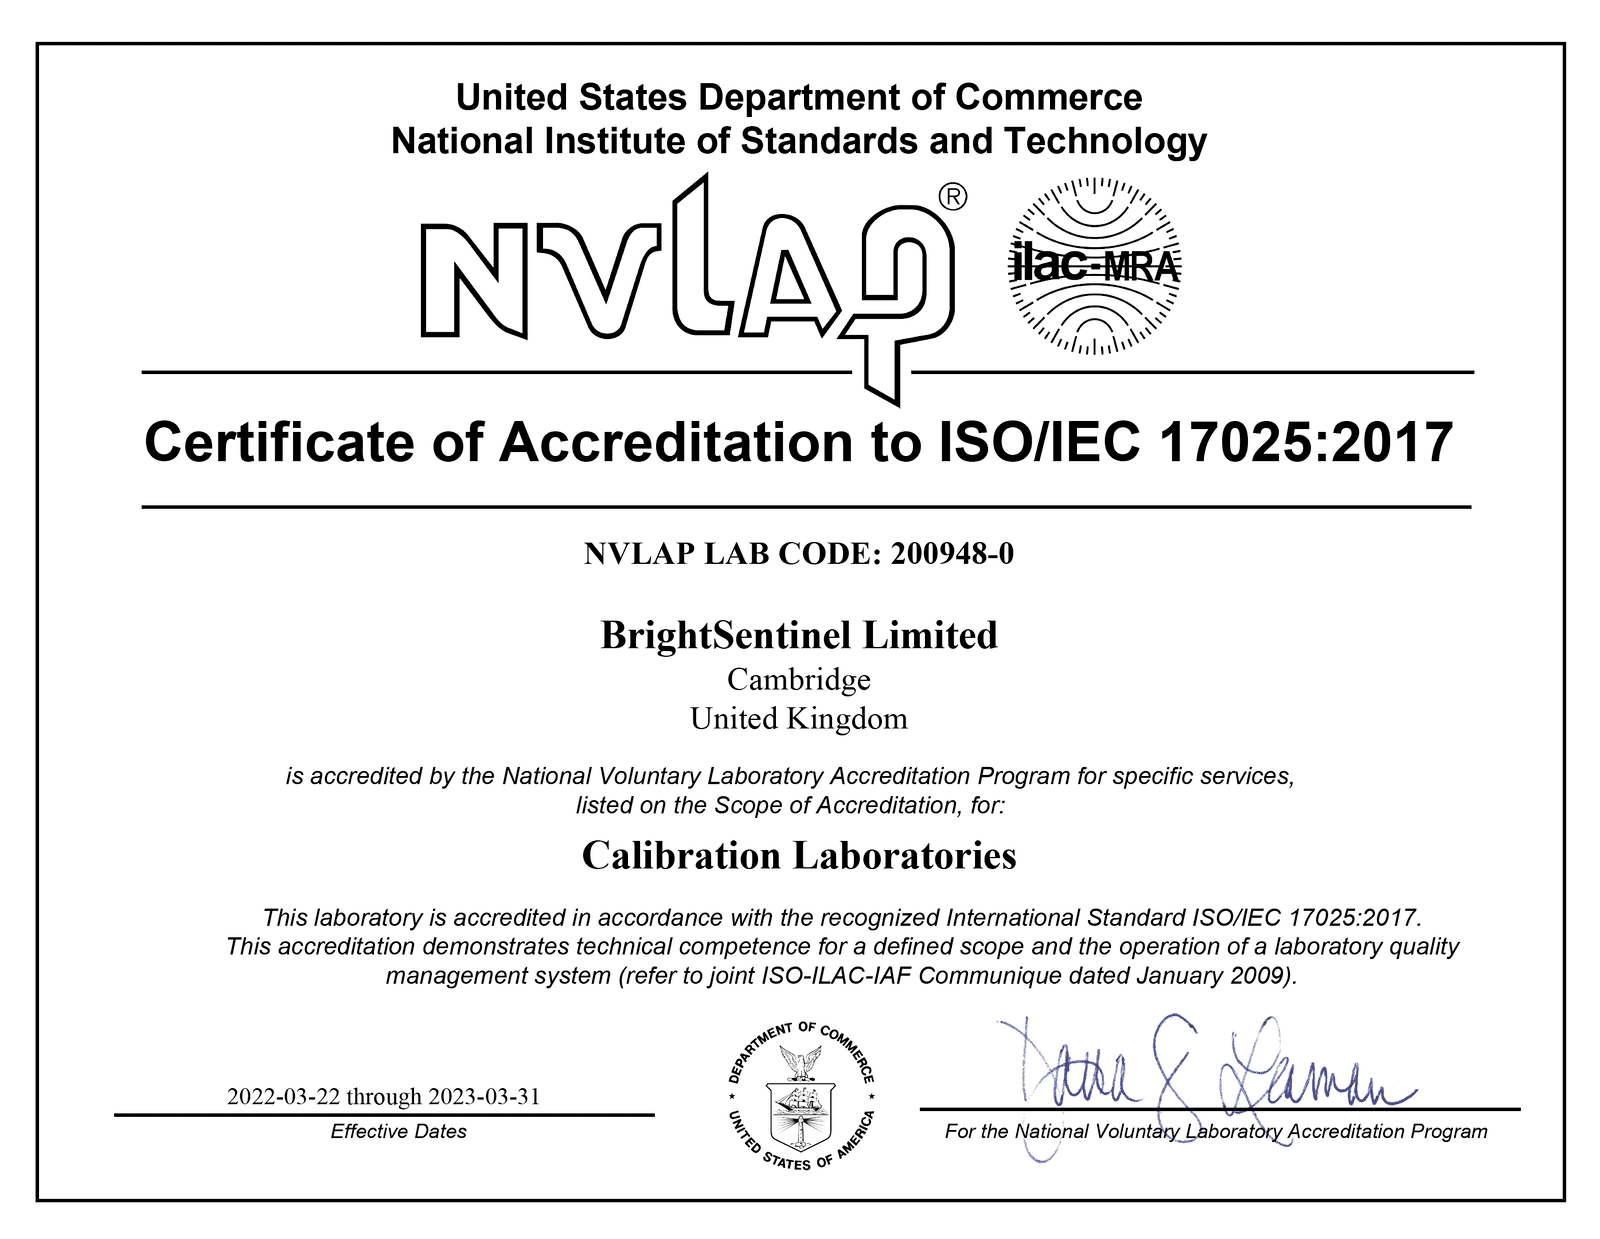 NVLAP accredited certification